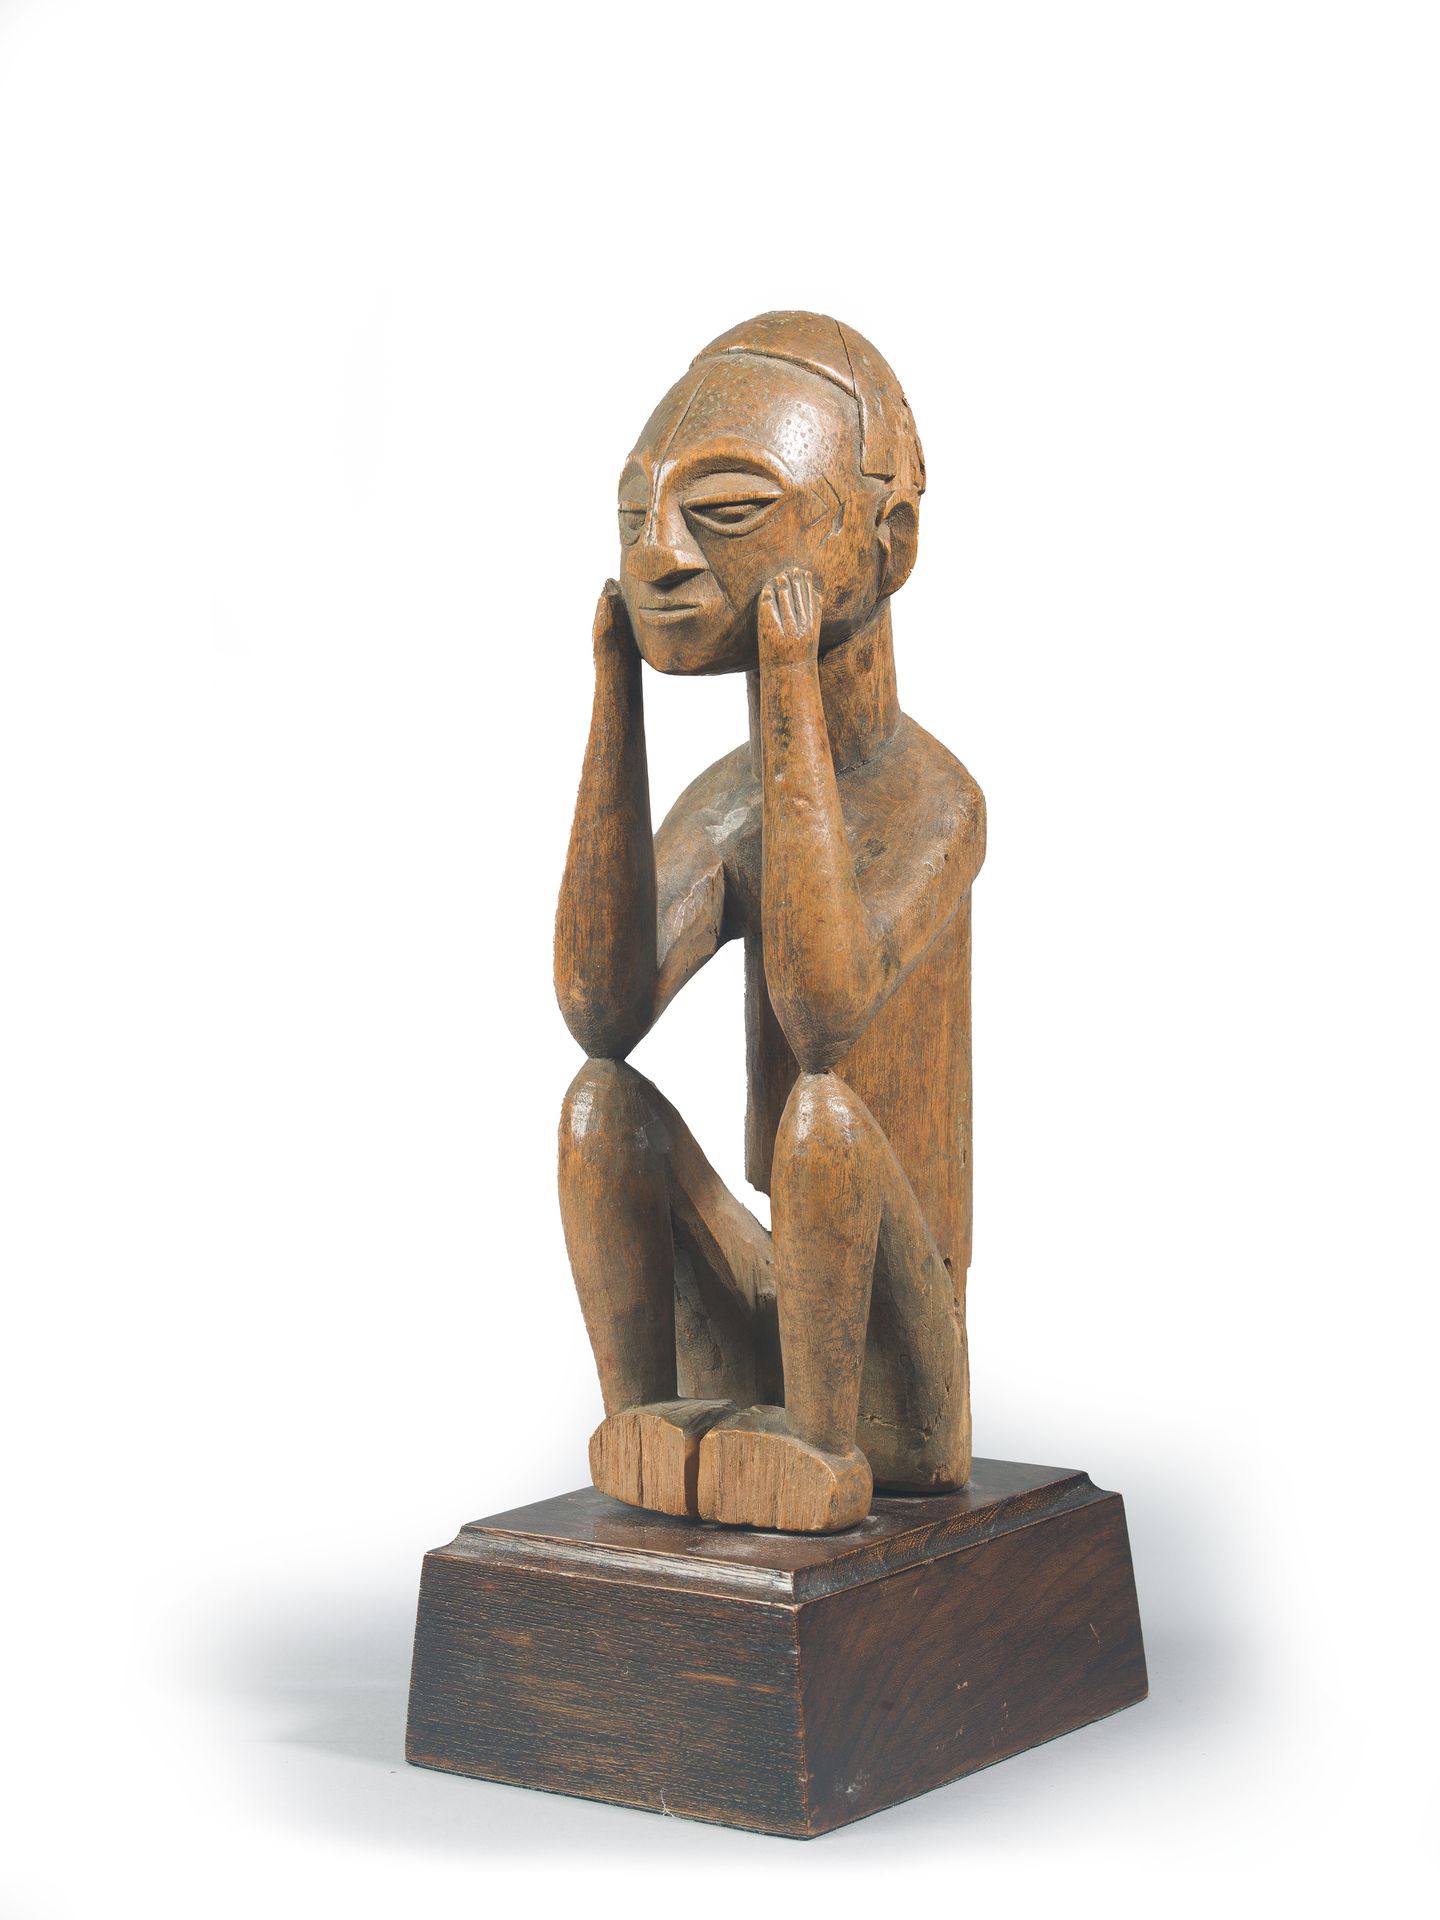 Null HOLO STATUE

In patinated wood

Democratic Republic of Congo

19th - 20th c&hellip;